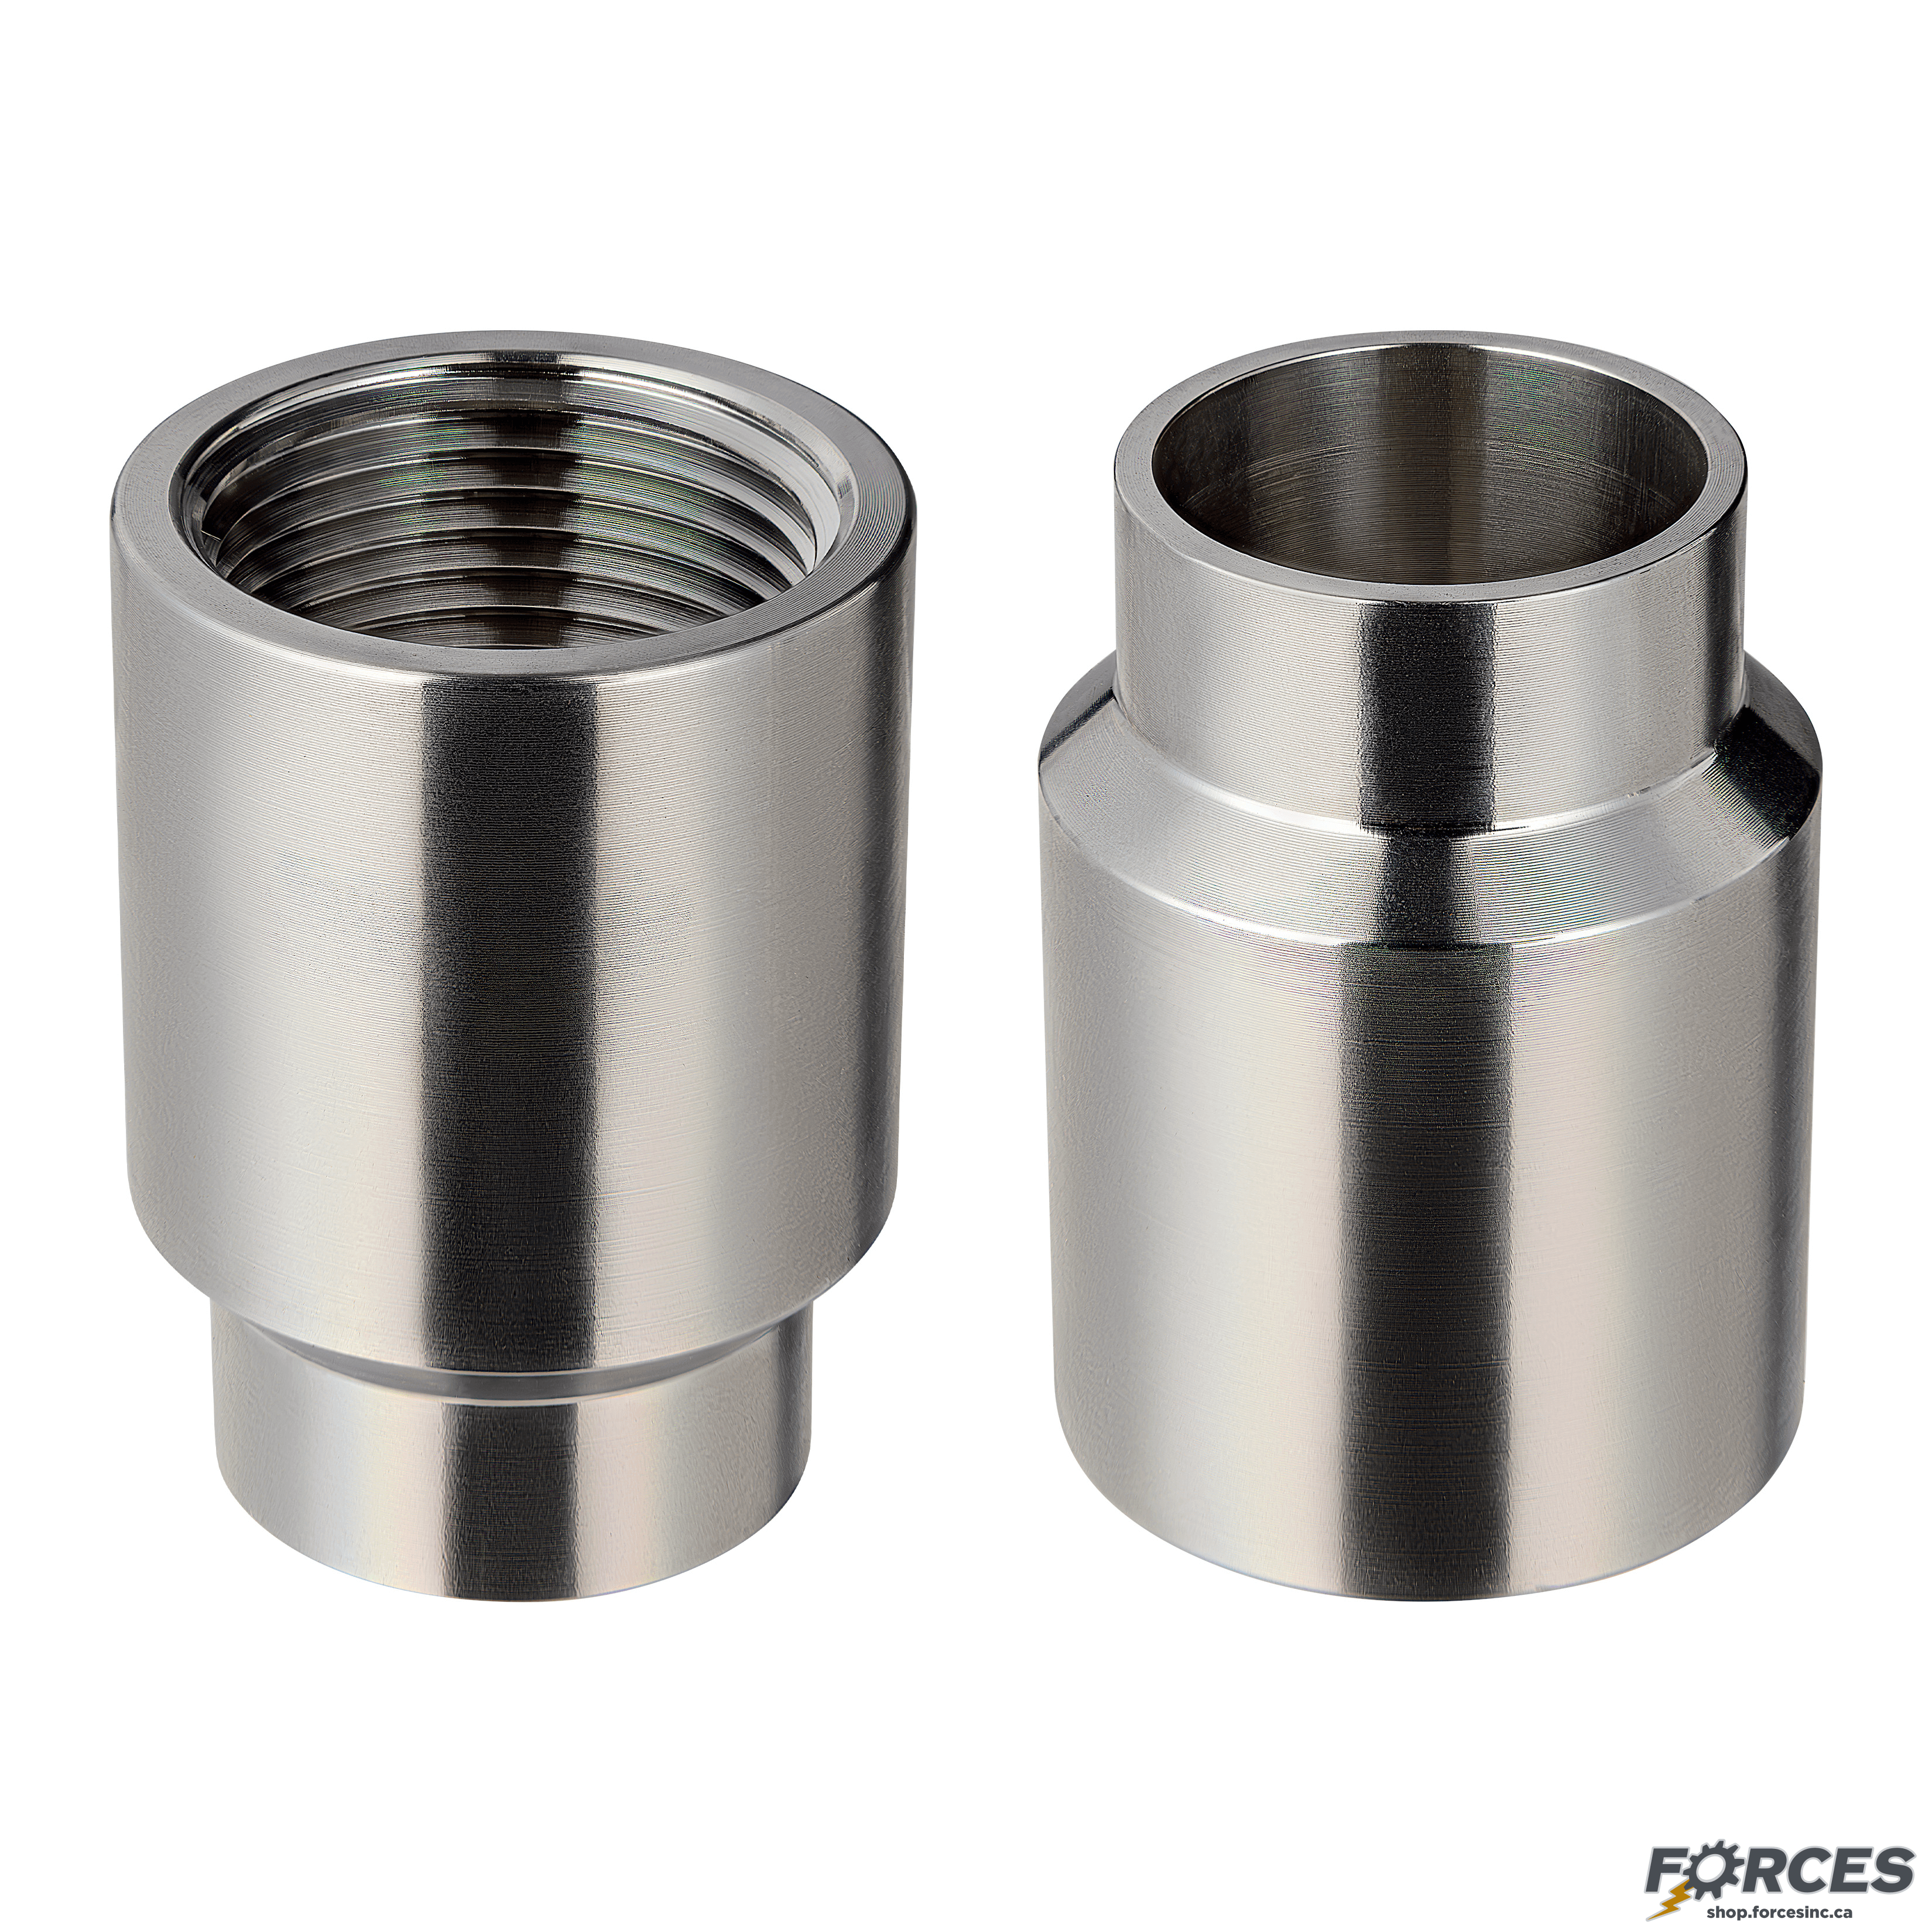 1" x 1" Butt Weld x Female NPT Adapter - Stainless Steel 316 - Forces Inc